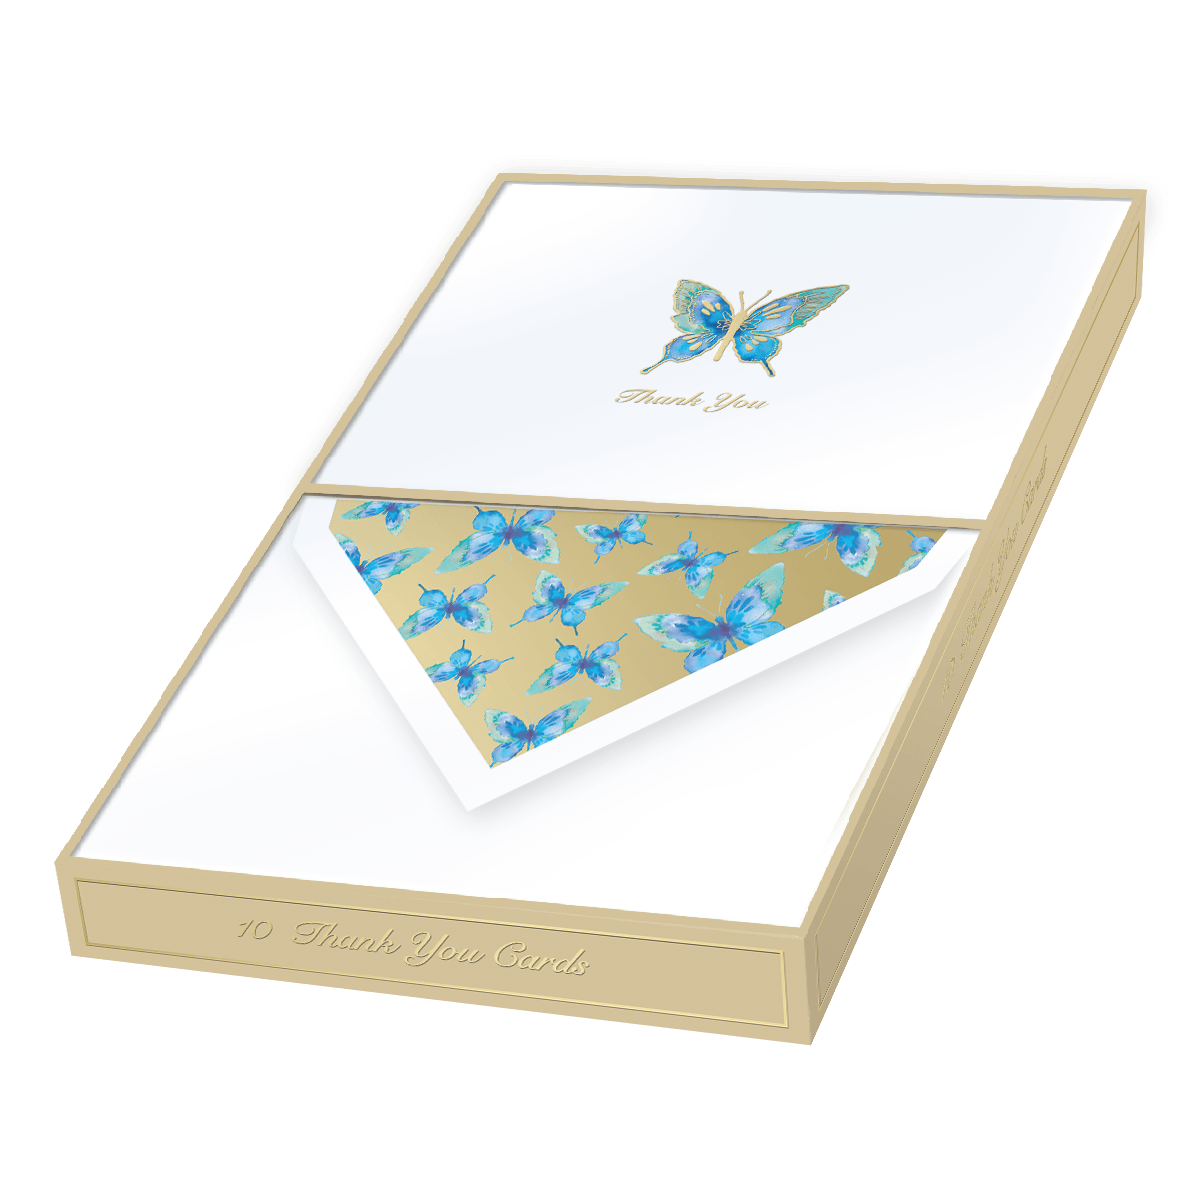 Embossed Cards Set, Note Card Set, Greeting Cards, Blank Cards, White Cards,  Note Cards, Thank You Cards, Butterfly Cards, BUTTERFLY 